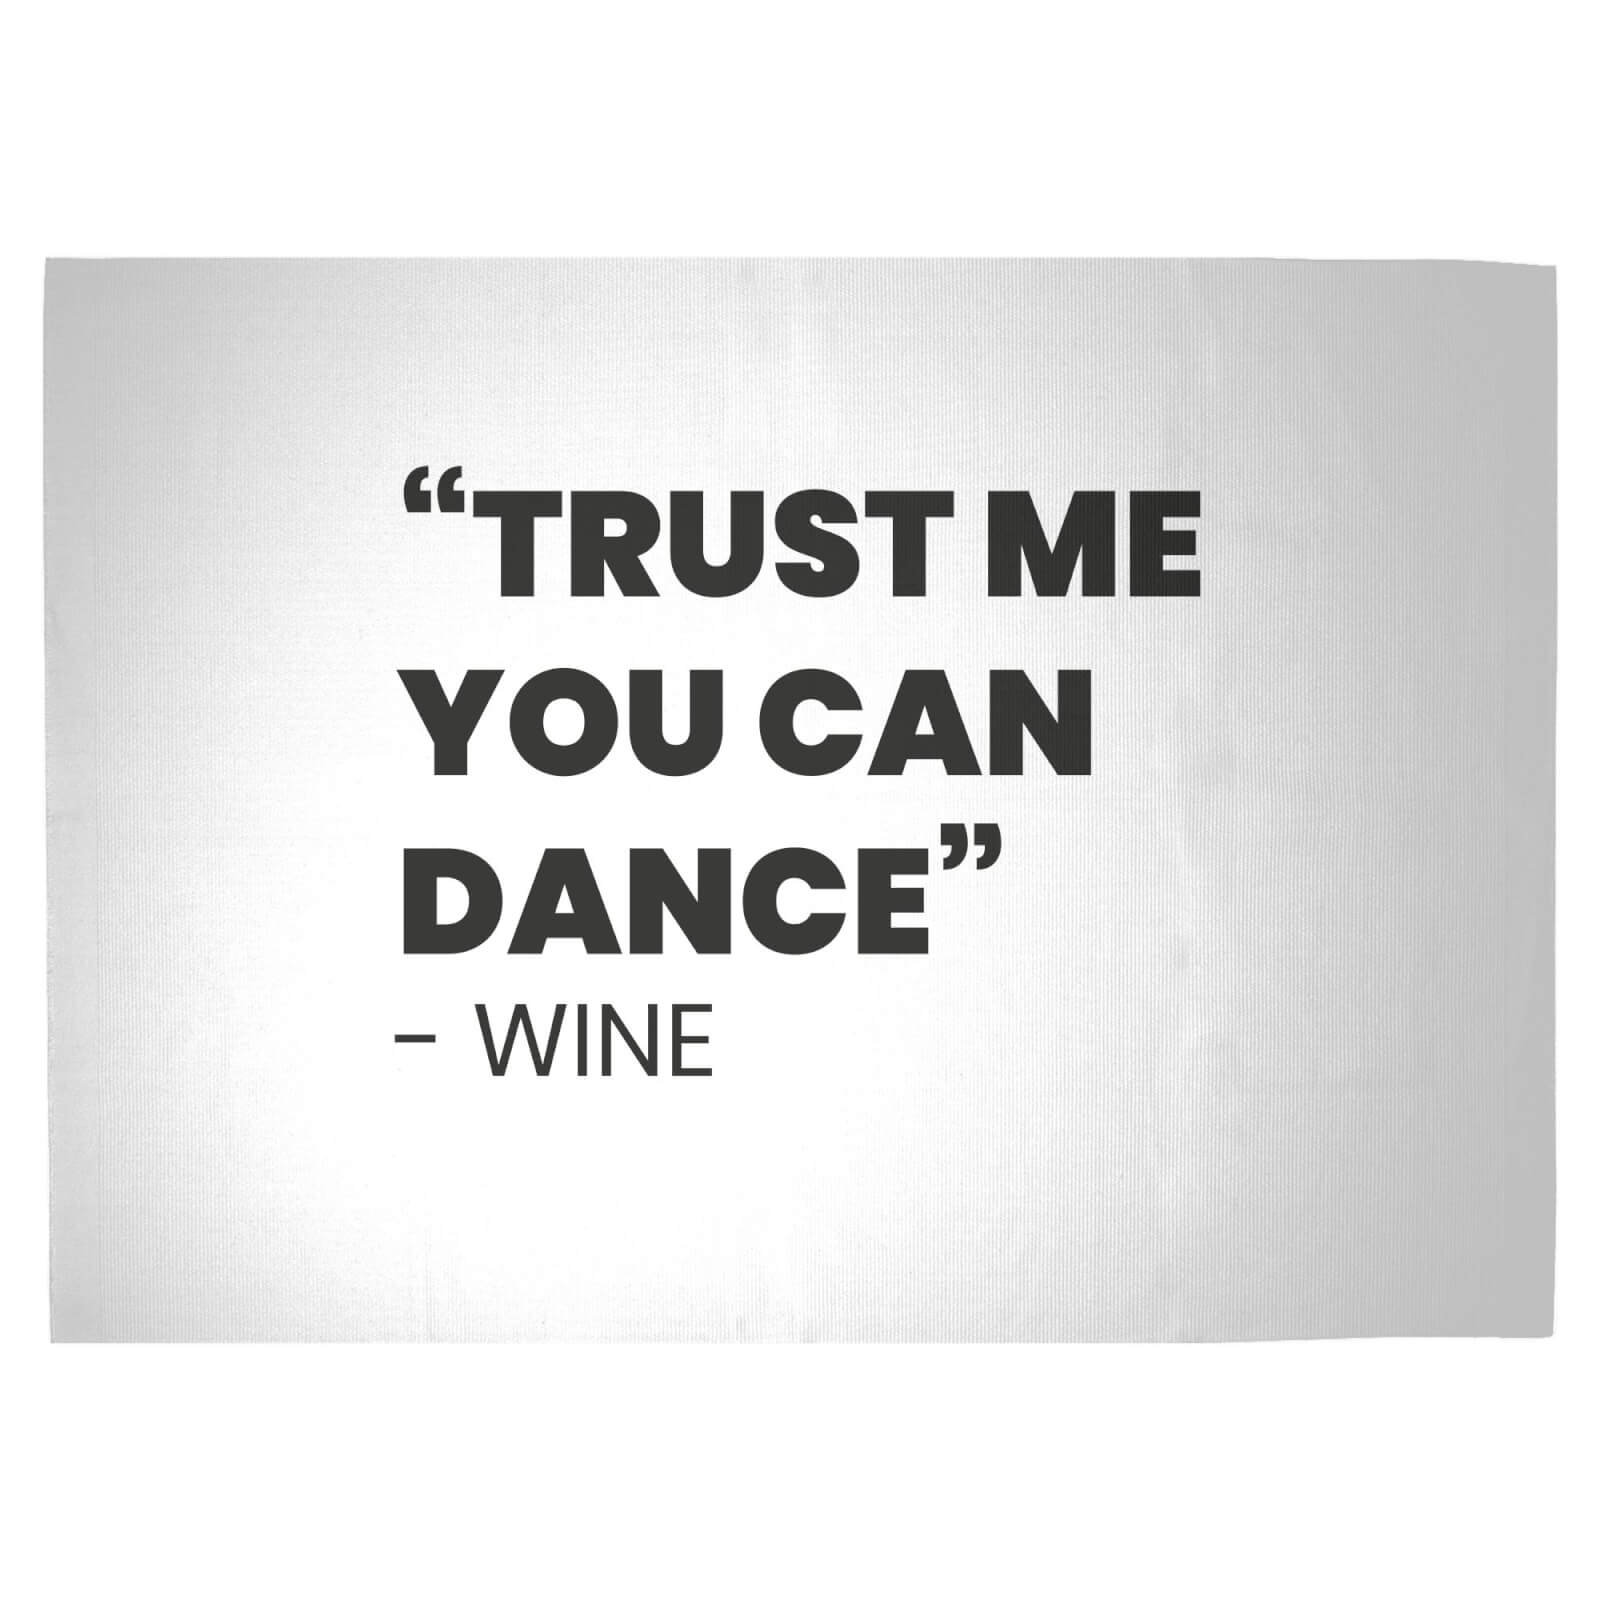 Trust Me You Can Dance - Wine Woven Rug - Large